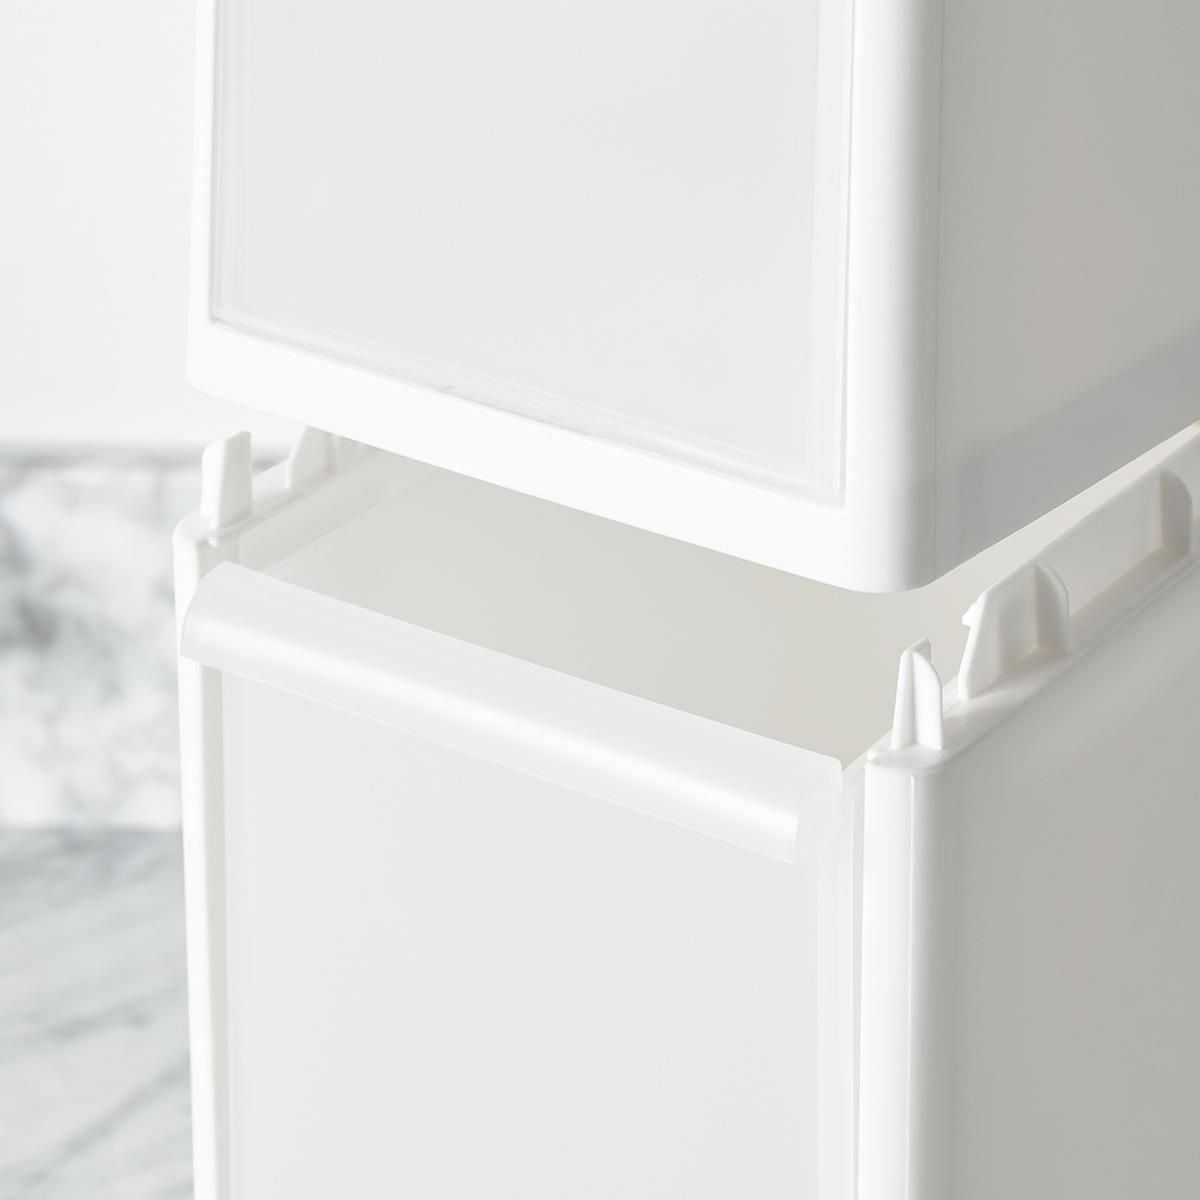 Like-it White Modular Drawers | The Container Store